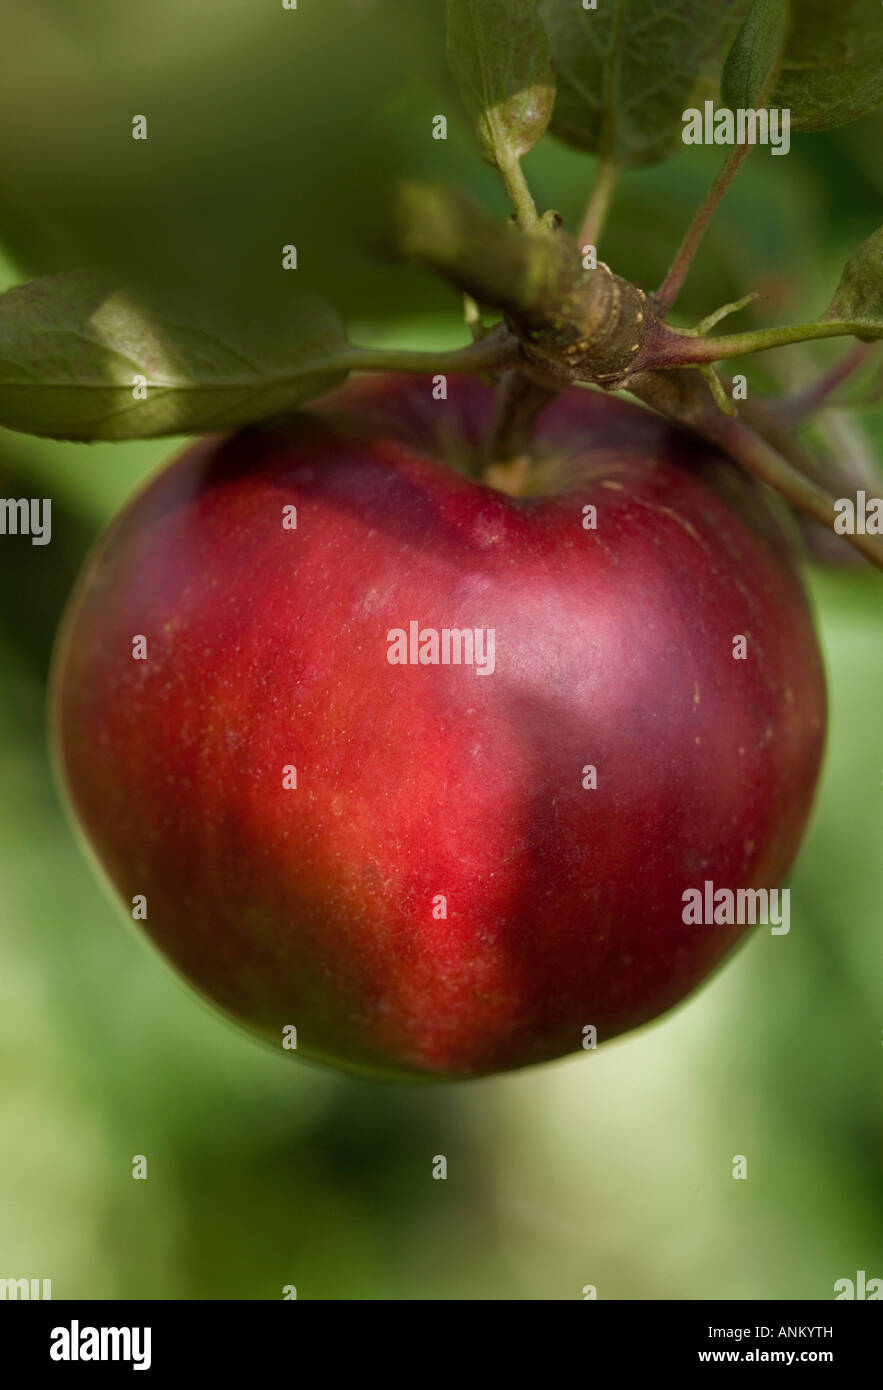 Healthy organic red apple growing on a tree Stock Photo